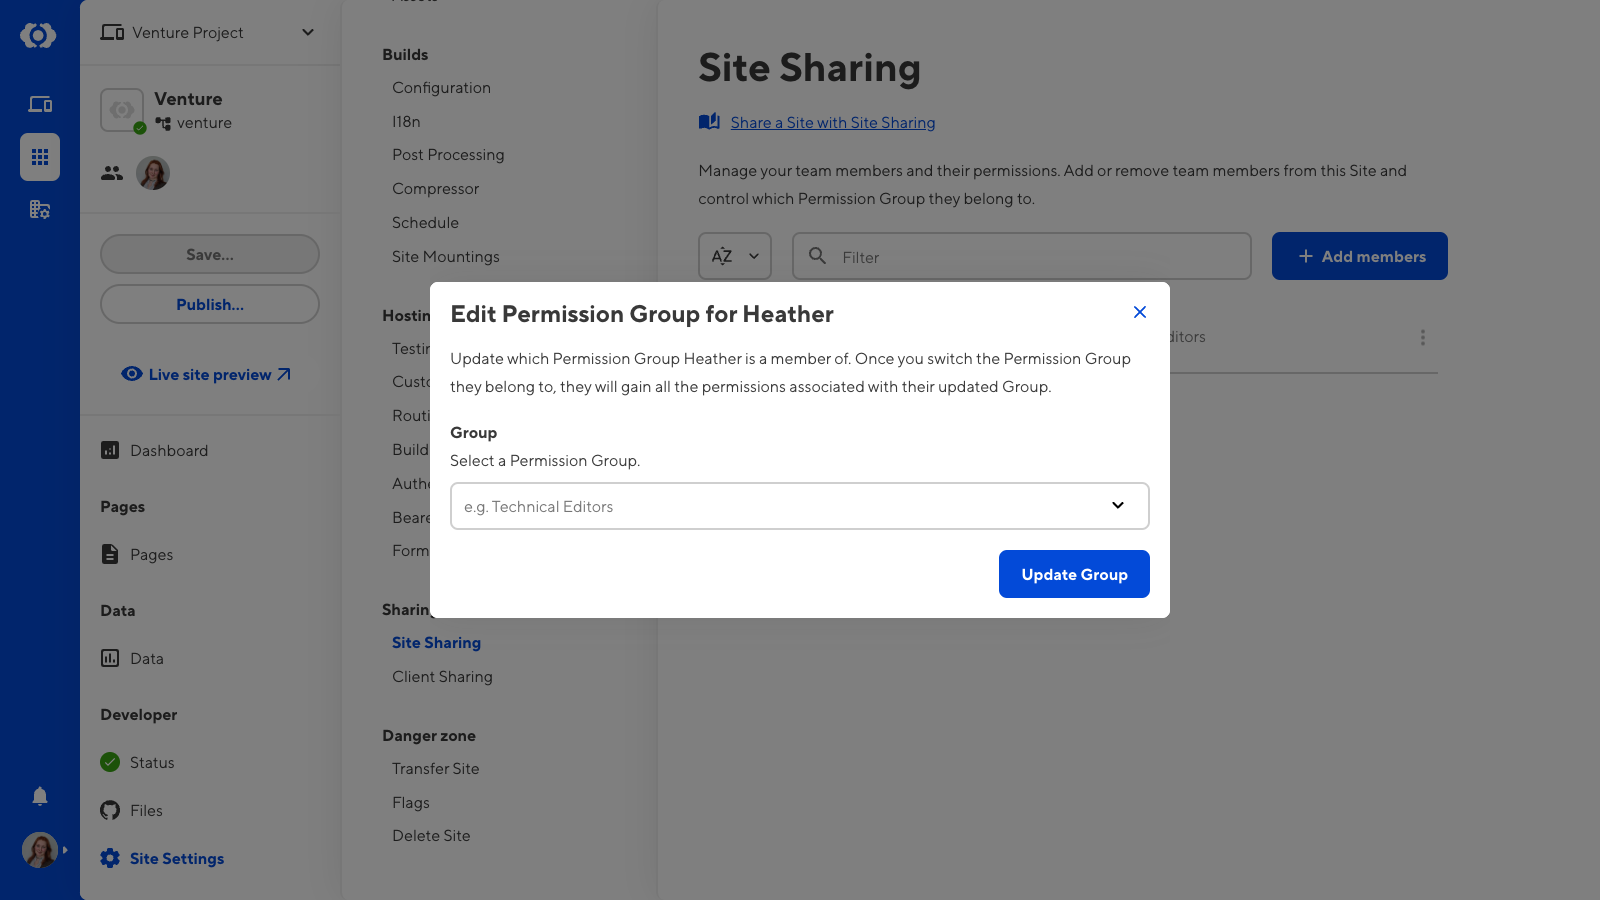 A screenshot of the Edit Permission Group modal shows one field to select which Site Sharing Permission Group a team member belongs to.